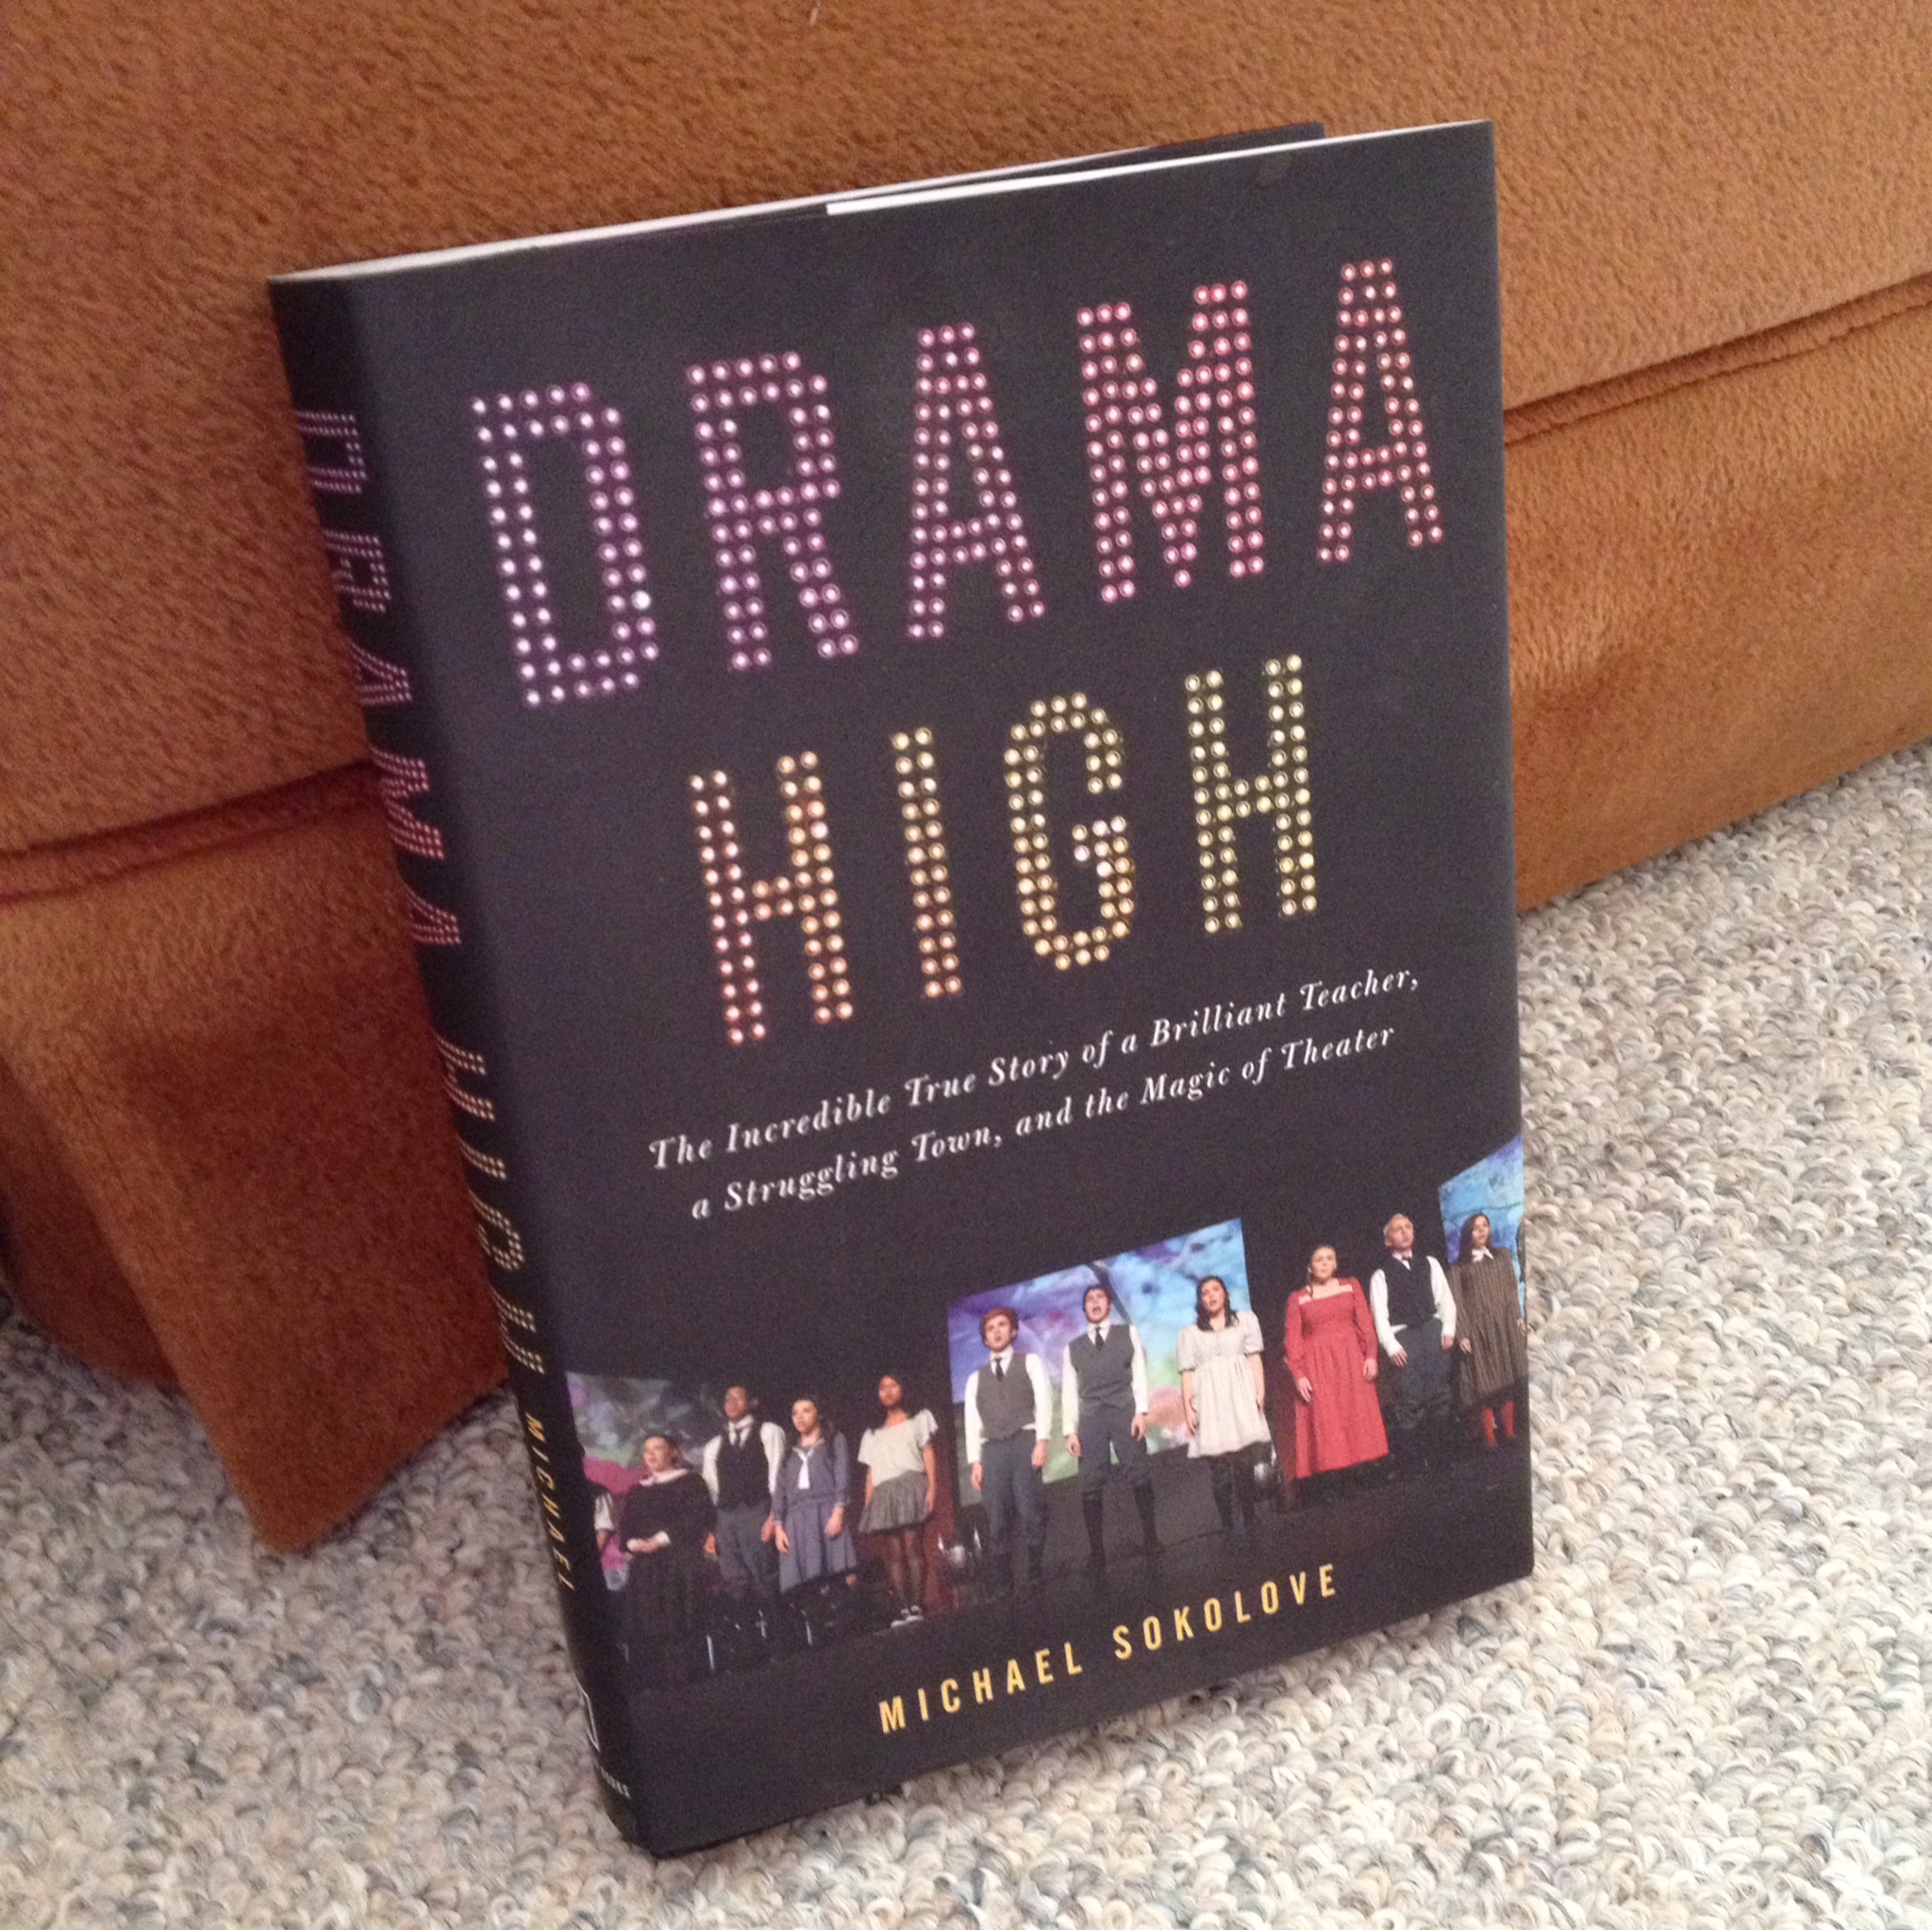 Drama-High-The-Incredible-True-Story-of-a-Brilliant-Teacher-a-Struggling-Town-and-the-Magic-of-Theater